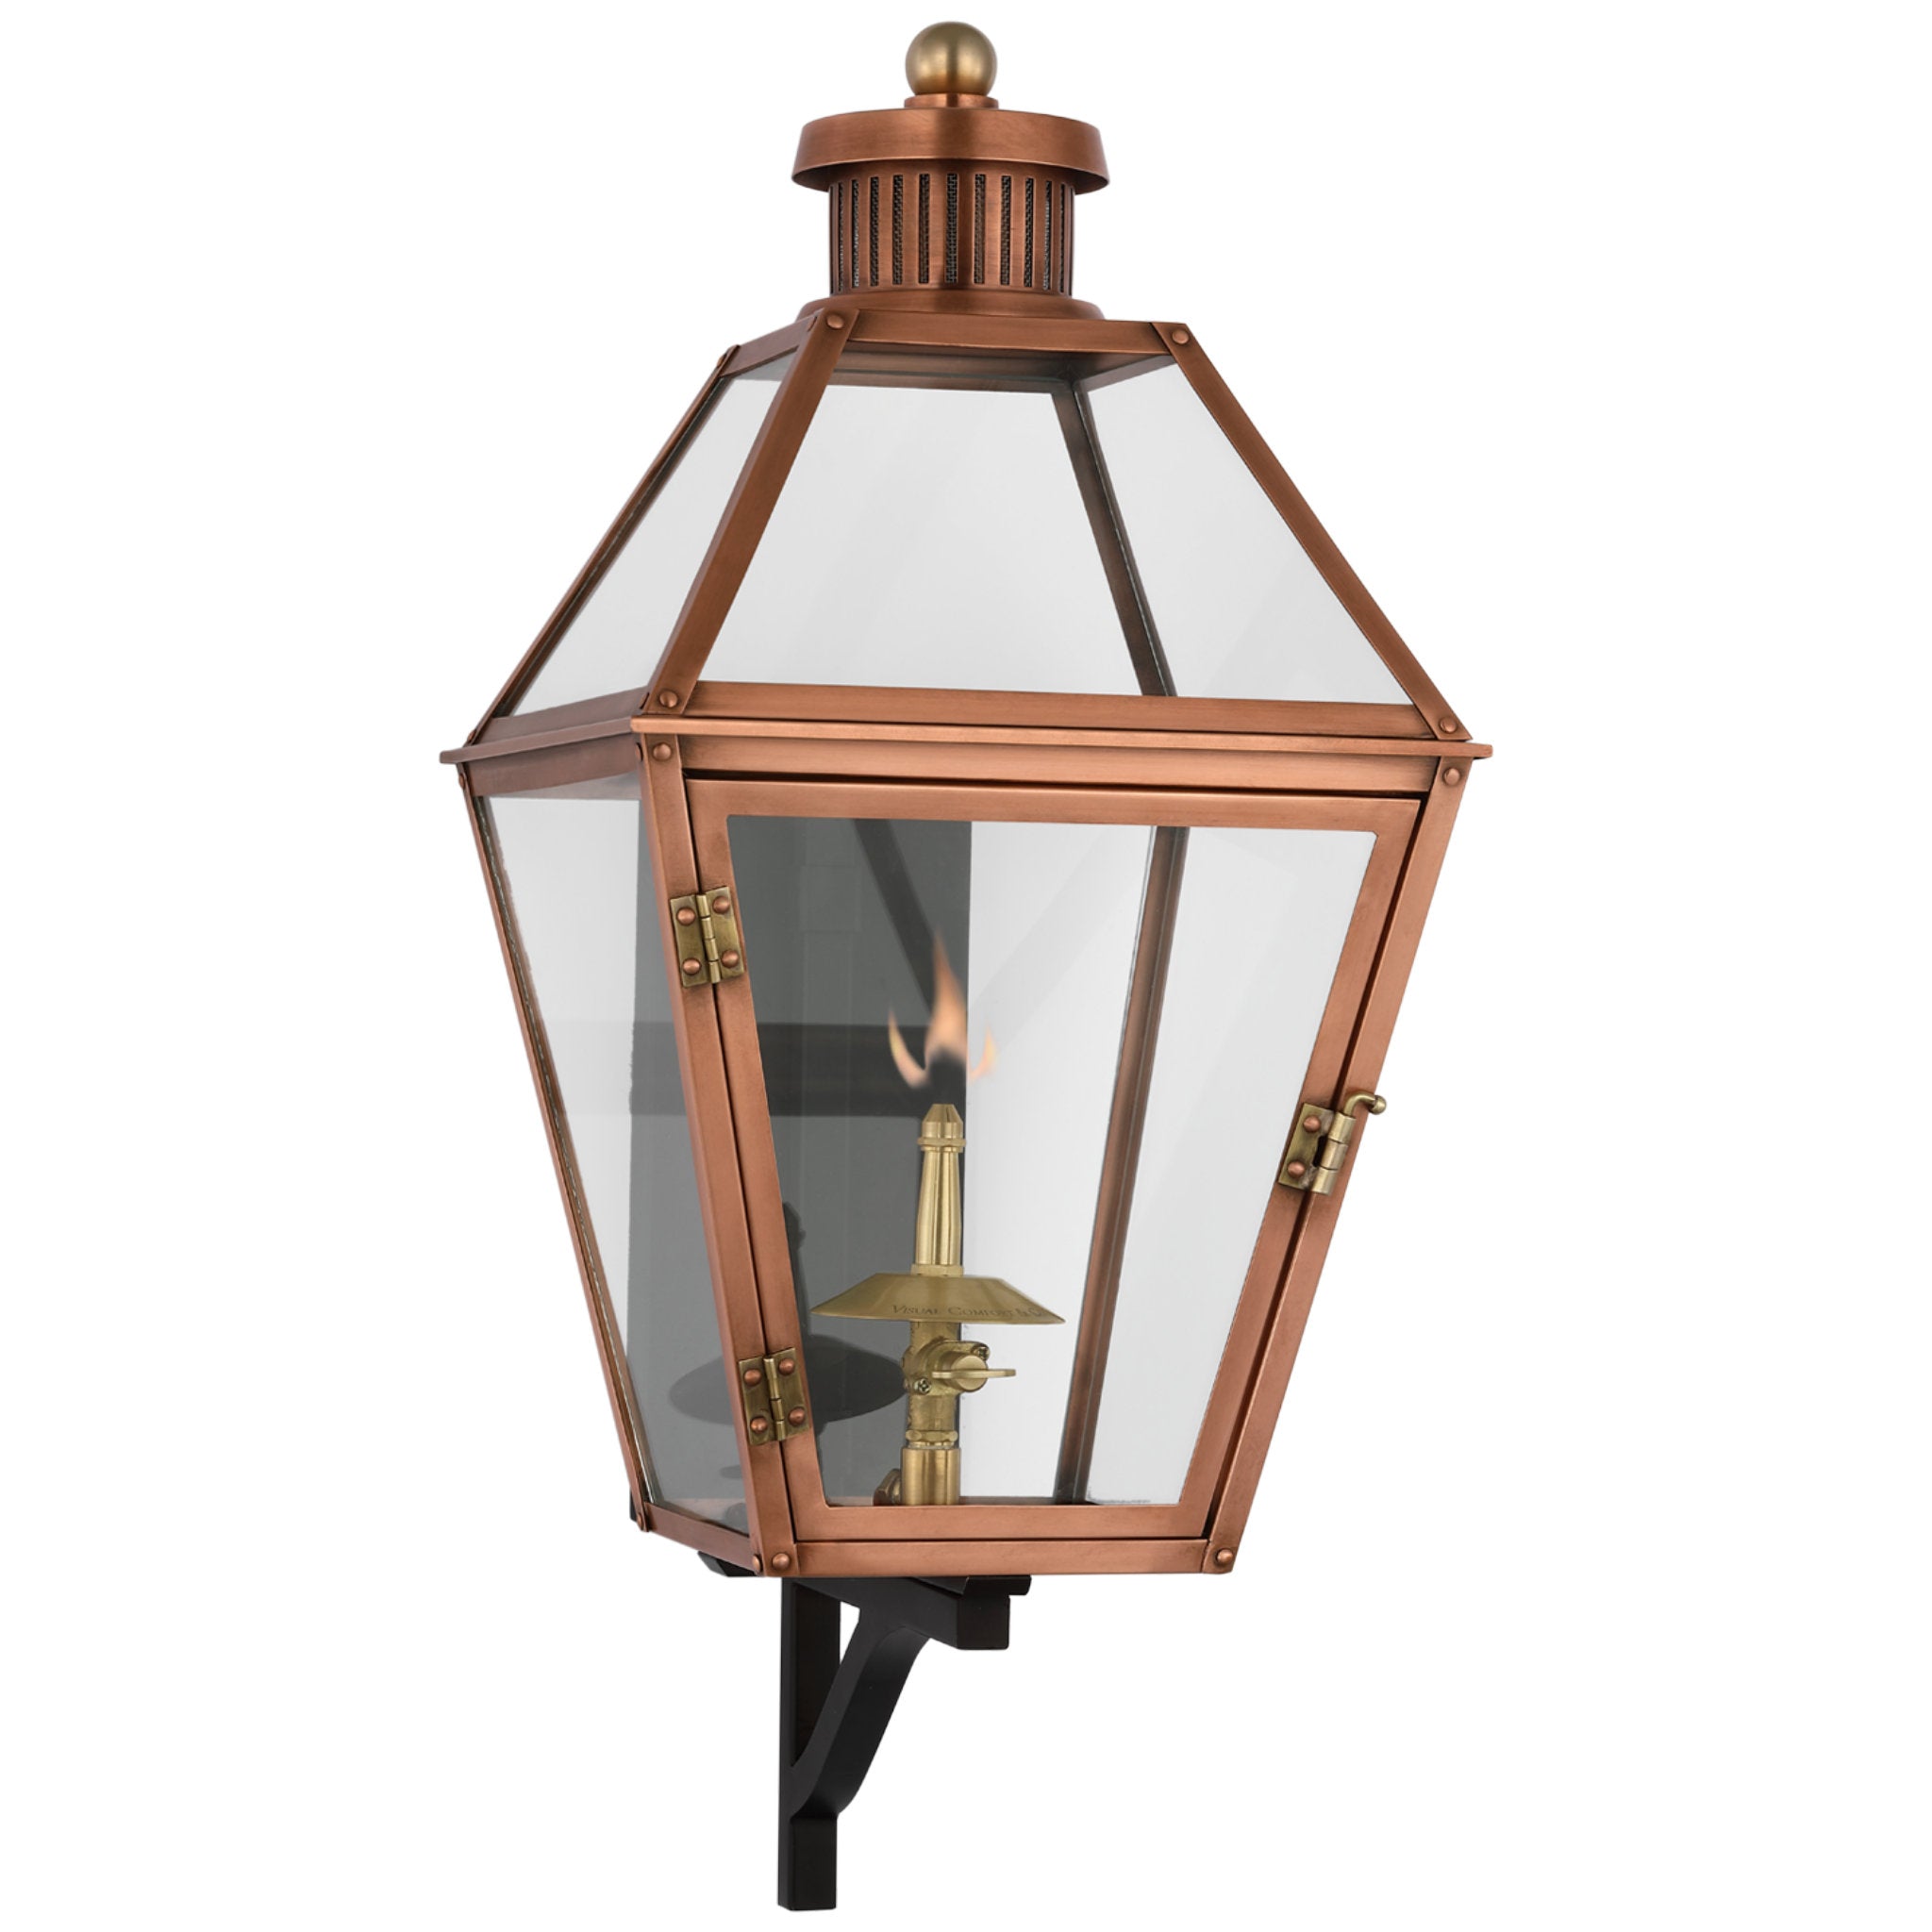 Chapman & Myers Stratford Small Bracketed Gas Wall Lantern in Soft Copper with Clear Glass